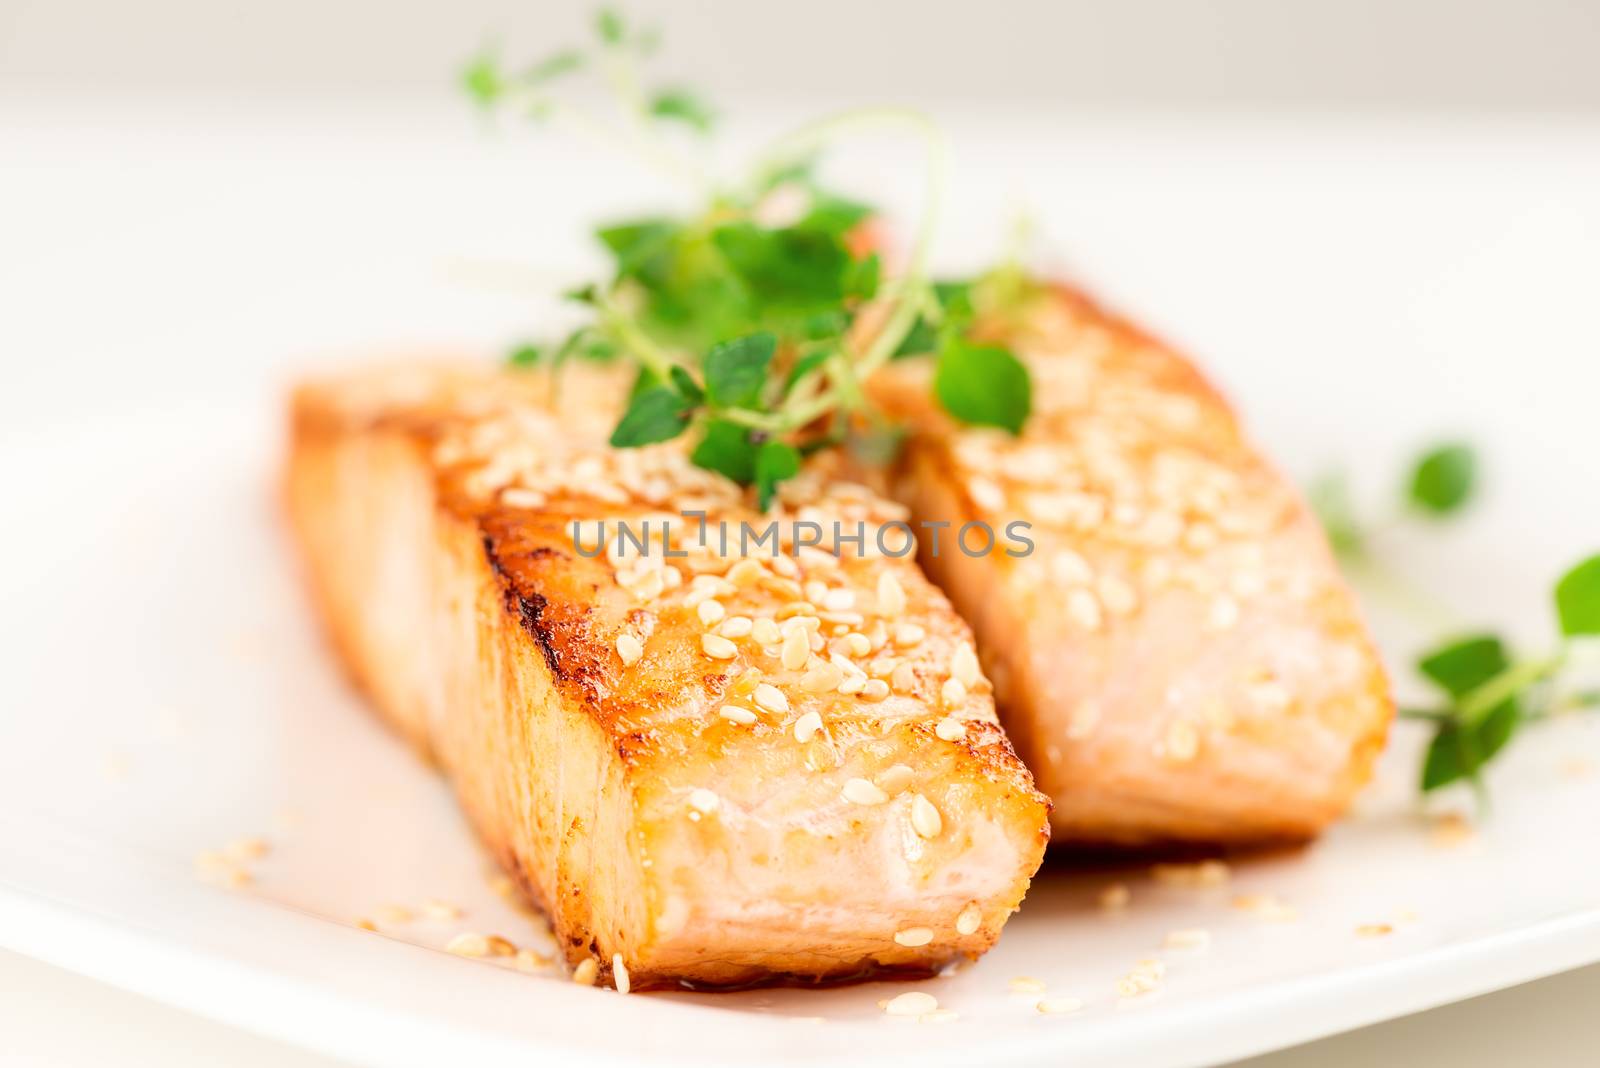 Grilled salmon, sesame seeds  and marjoram on white plate. Studio shot